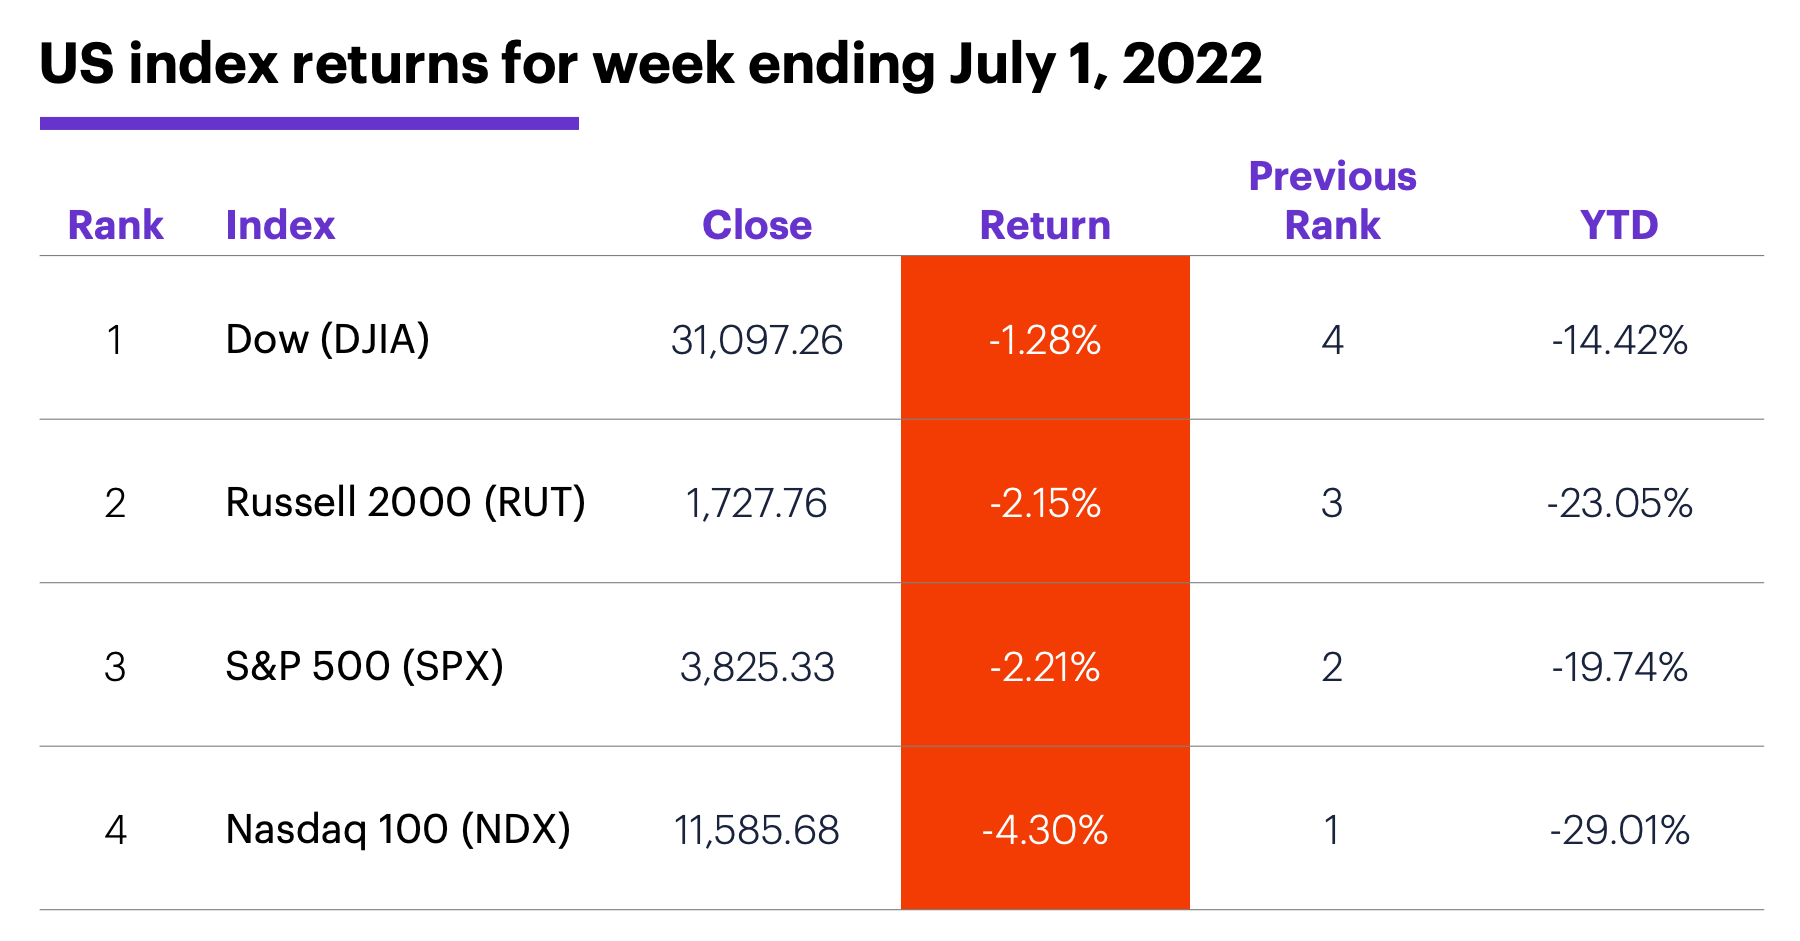 US stock index performance table for week ending 7/1/22. S&P 500 (SPX), Nasdaq 100 (NDX), Russell 2000 (RUT), Dow Jones Industrial Average (DJIA).